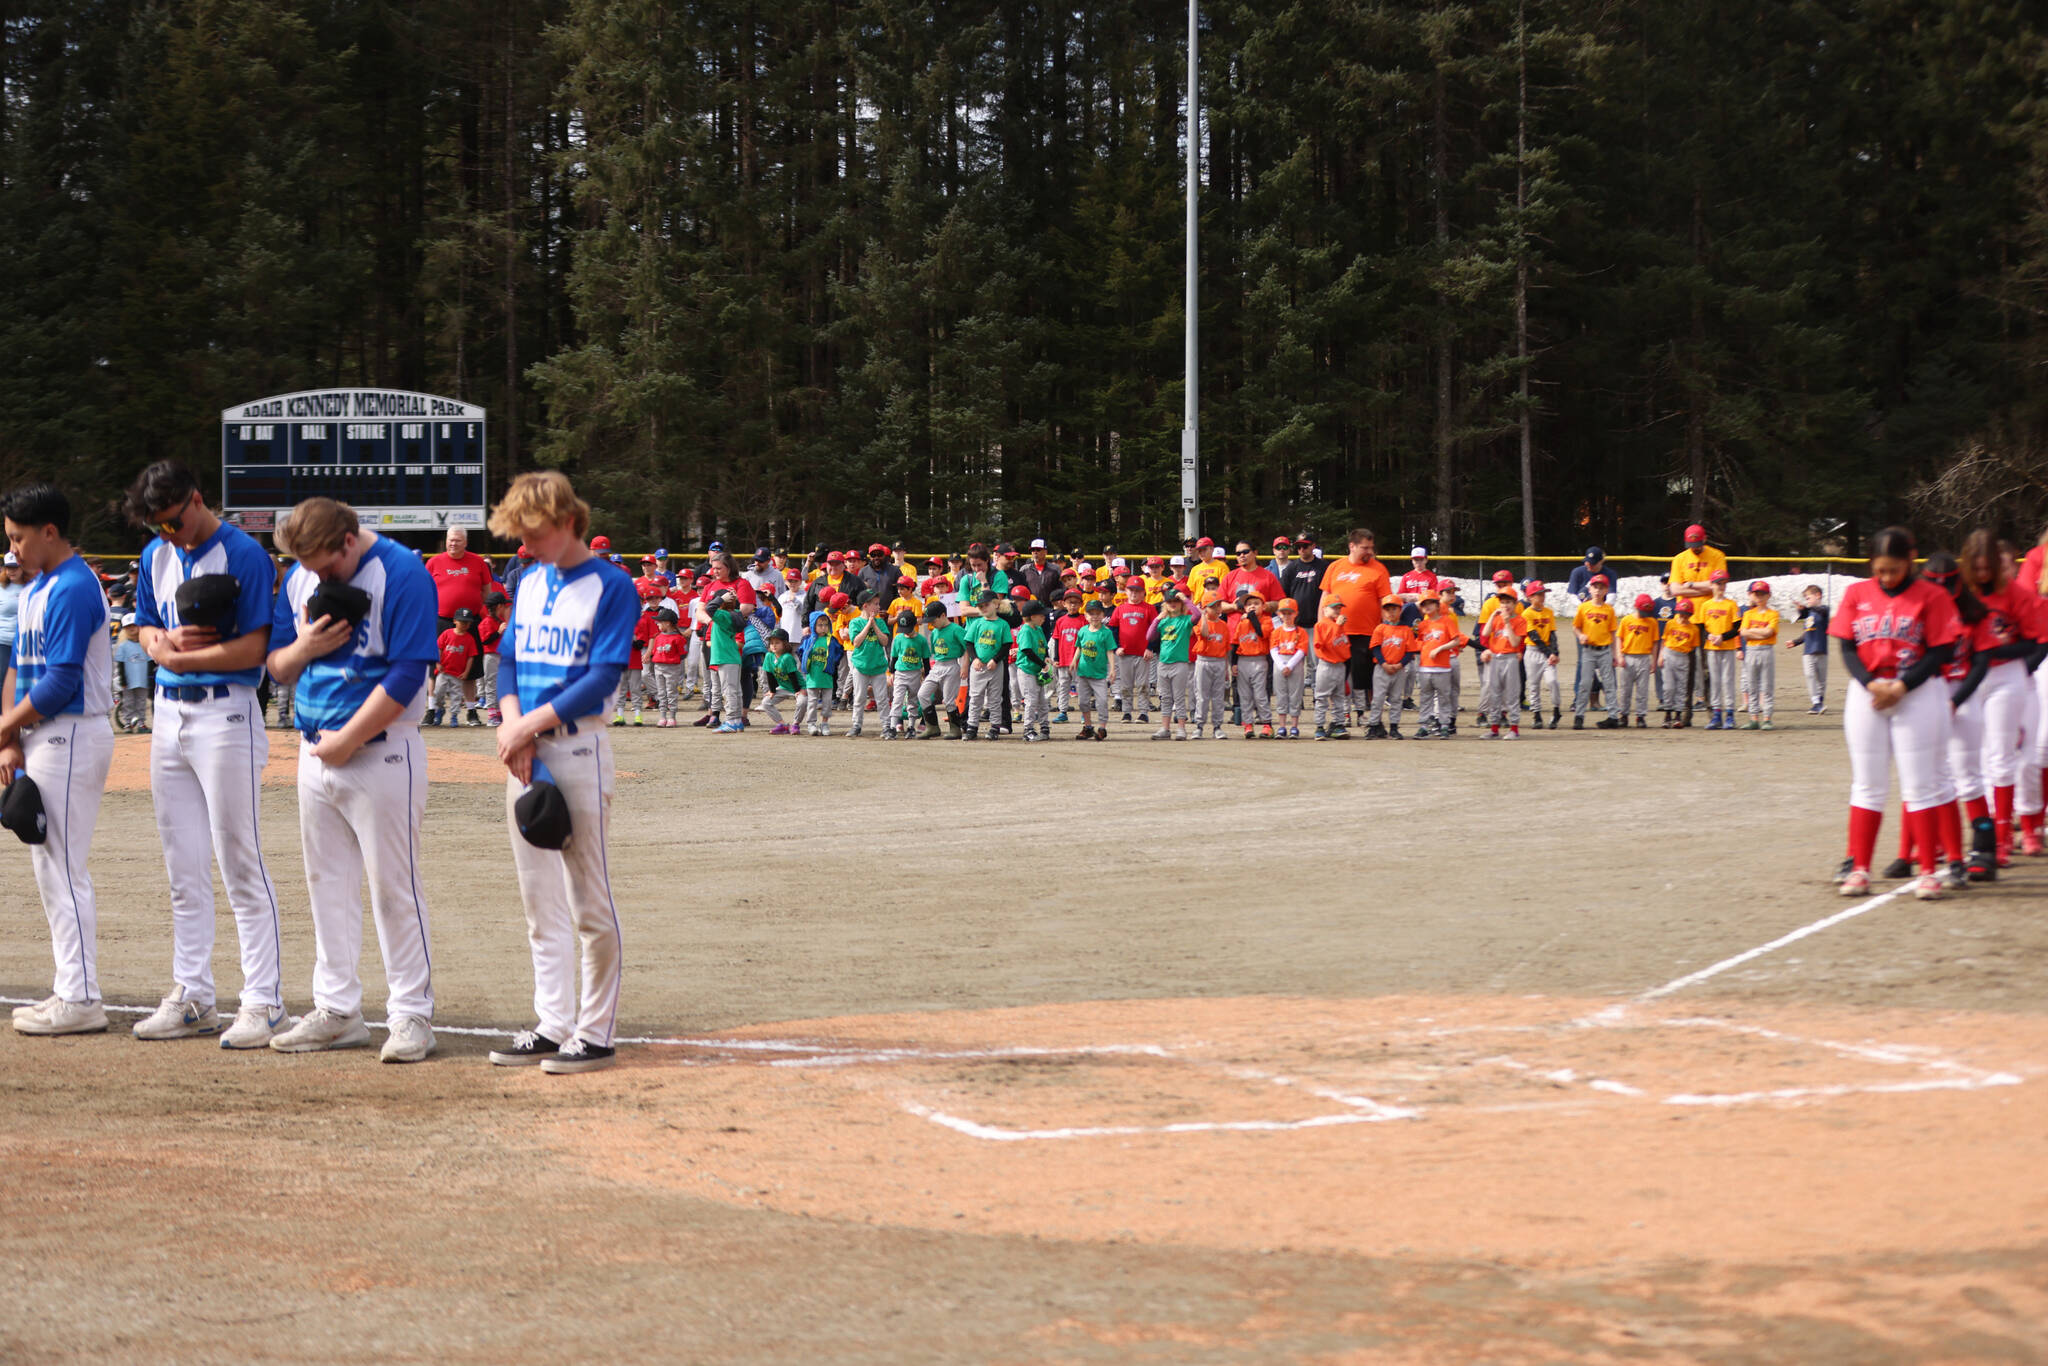 High school and Little League baseball and softball teams bow their heads during invocation for Gastineau Channel Little League’s opening day Saturday at Adair-Kennedy Memorial Park. (Ben Hohenstatt / Juneau empire